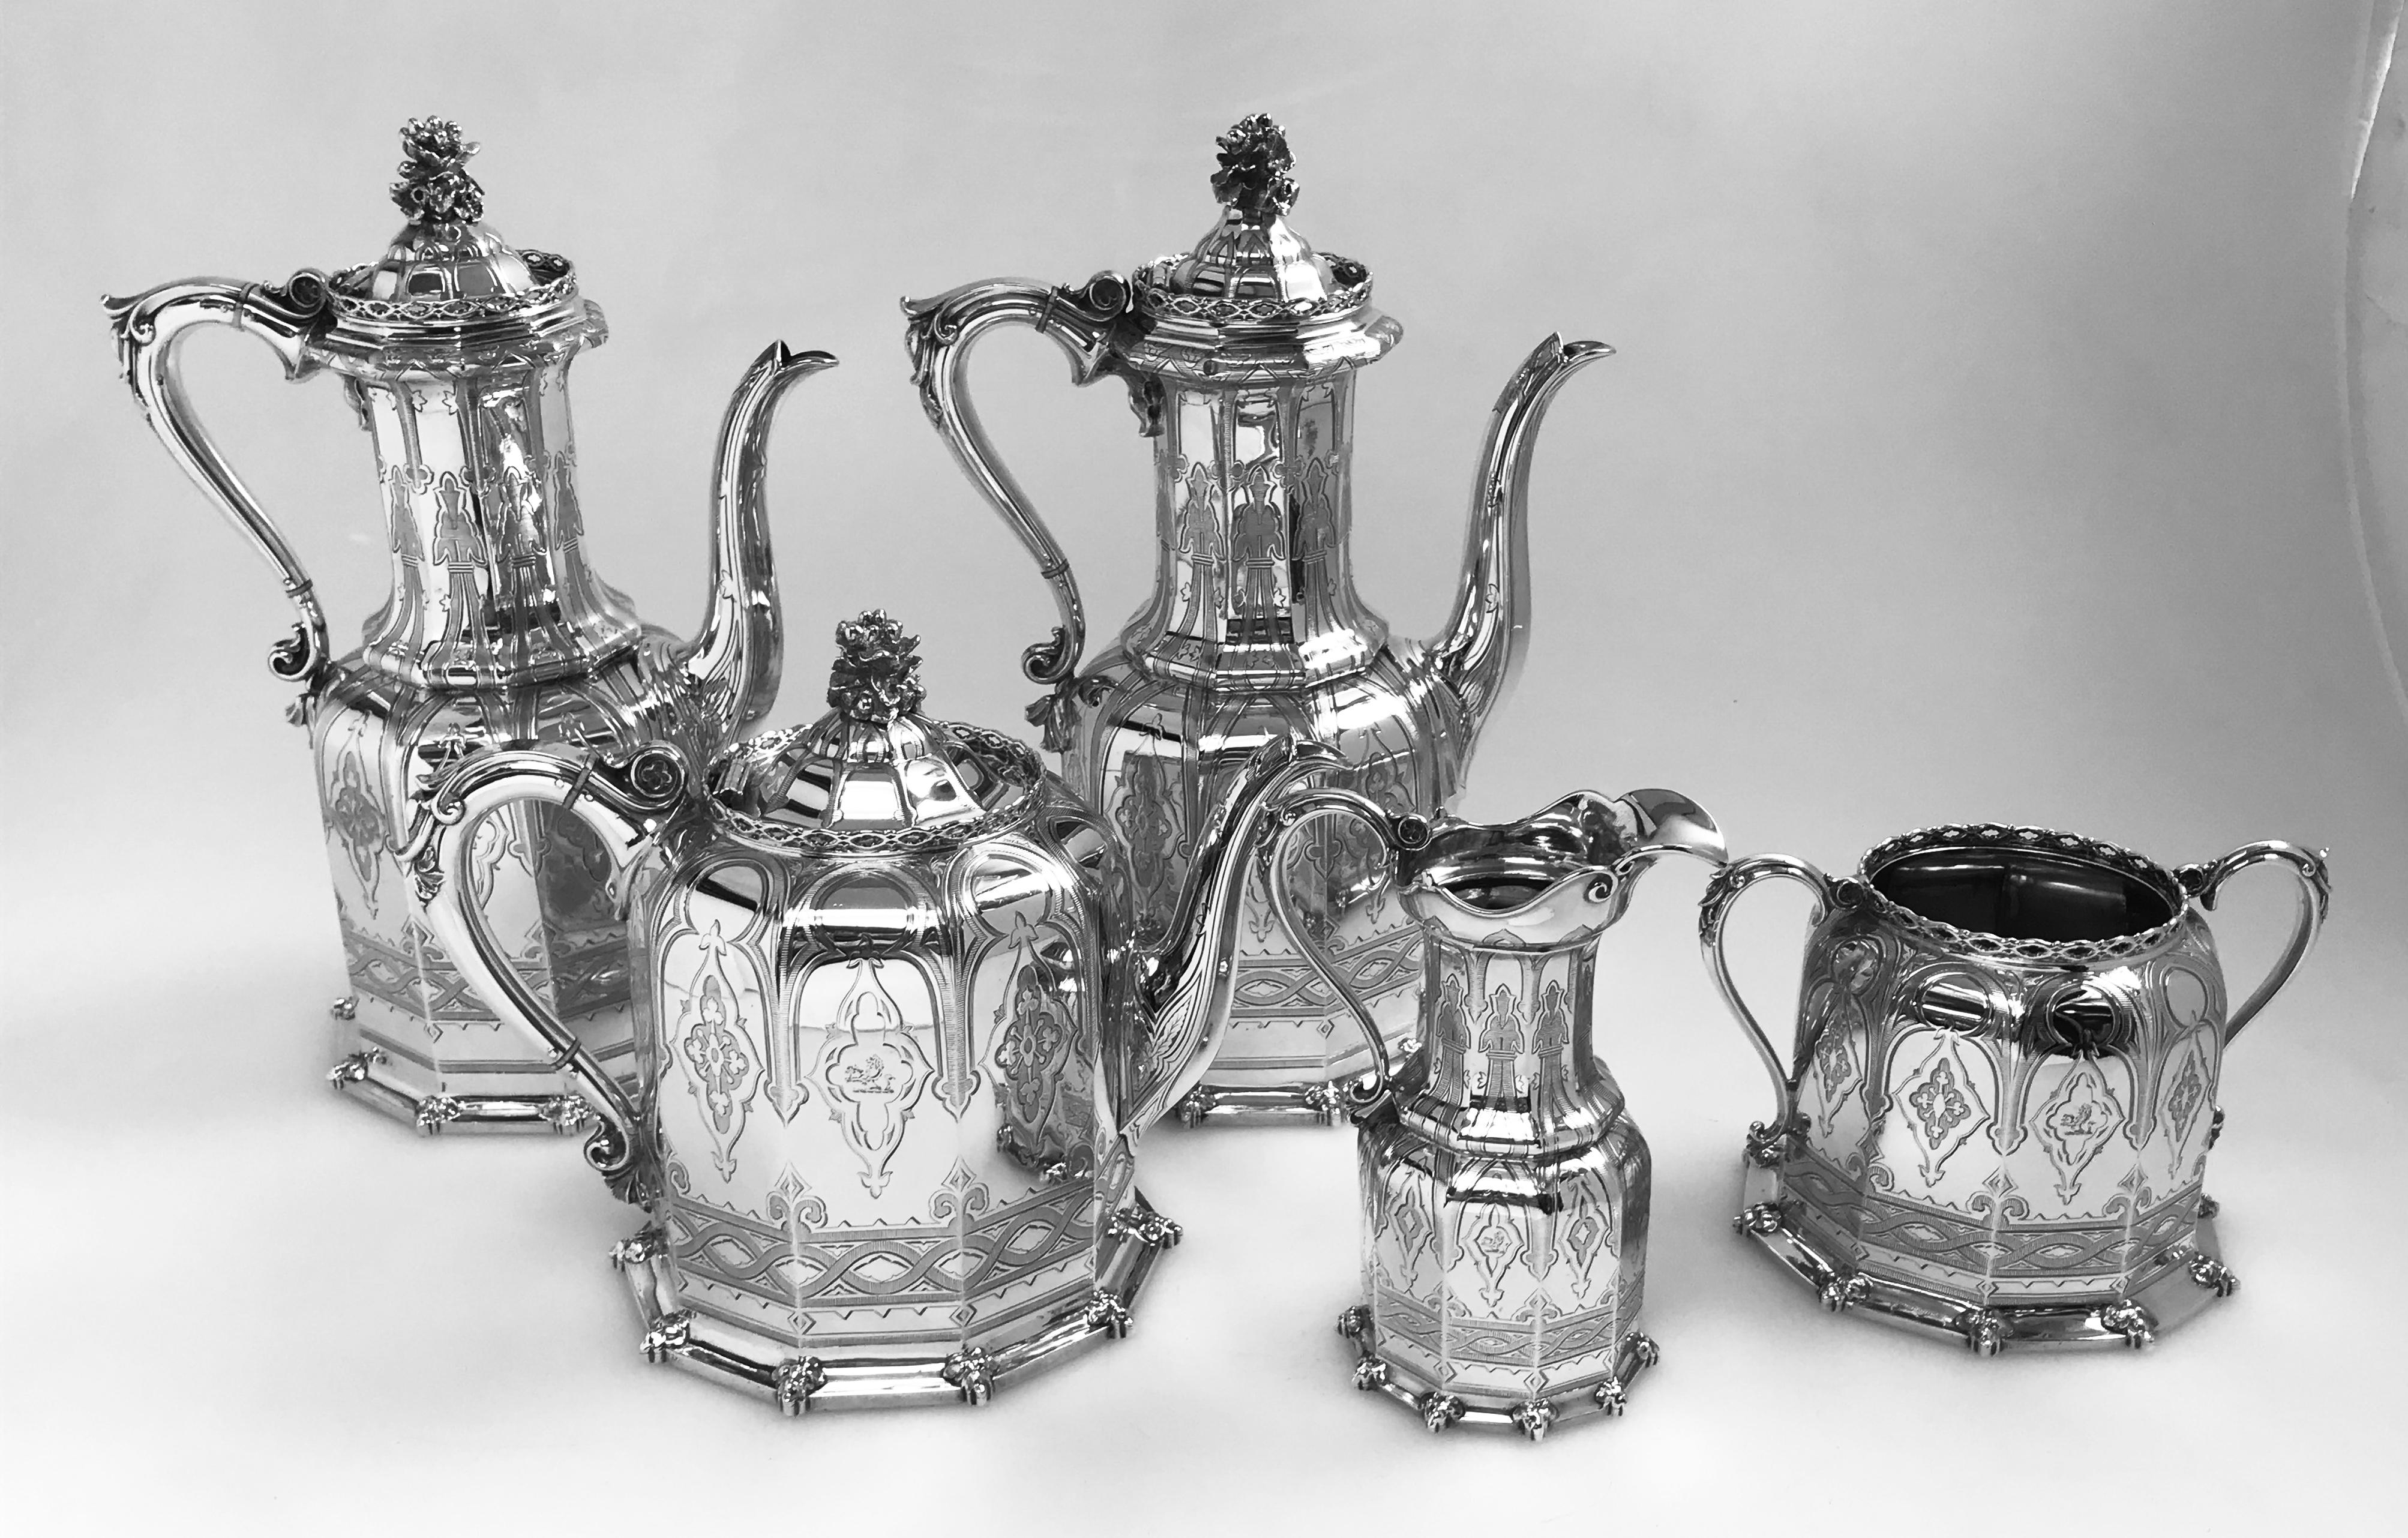 A 5-piece silver tea and coffee set hallmarked in the year 1853 in Birmingham, England by the internationally renowned firm of Elkington & Co. The set is in the neo-Gothic style that was popular in the mid-1850s, and consists of two coffee pots, one